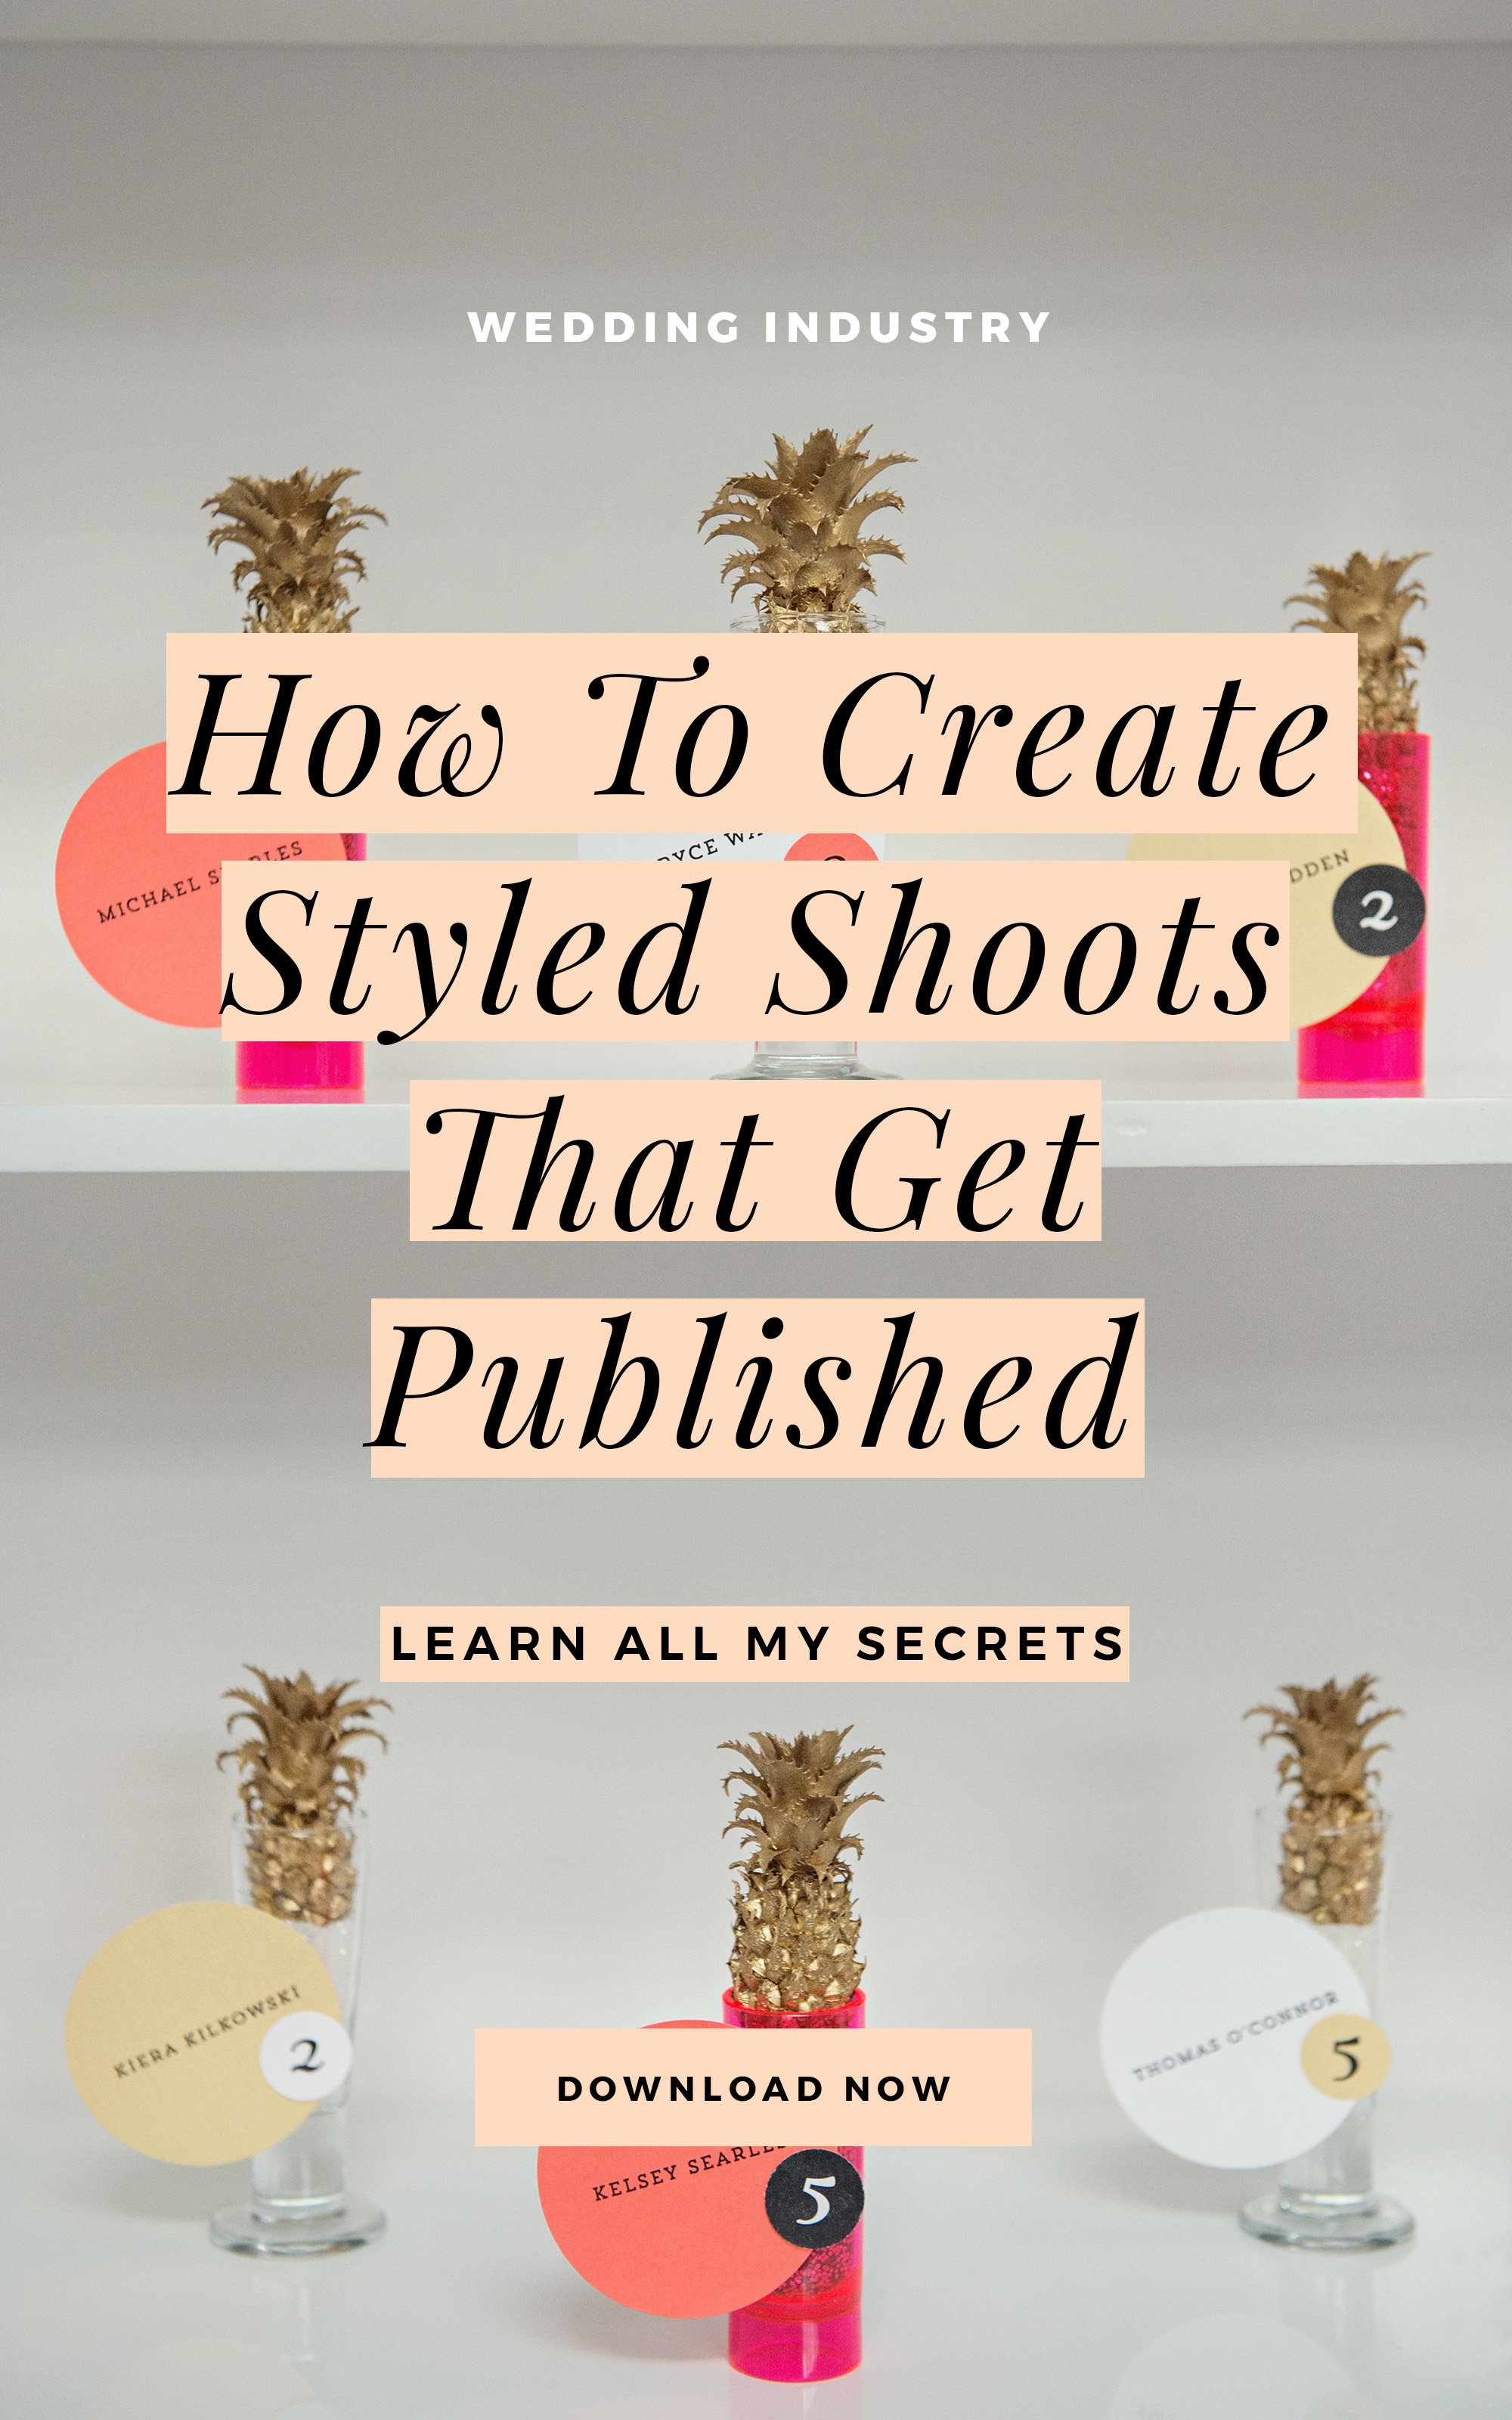 I've designed over 40 styled shoots during my career! Many of these projects have landed on the cover of magazines and they also scored me a 2 book deal with Schiffer Publishing. This FREE guidebook shares ALL my secrets on how to create a styled shoot that gets published. If you're looking for styled shoot tips, tricks, and hacks, then this guidebook is exactly what you need! Even if you've never styled a photoshoot before, I will walk you through what you need to know, how to prepare, and how to make the most of the process. Download The Ultimate Guide: How To Create Styled Shoots That Get PUBLISHED! #weddingpros #weddingplanner #weddingphotographer #candicecoppola